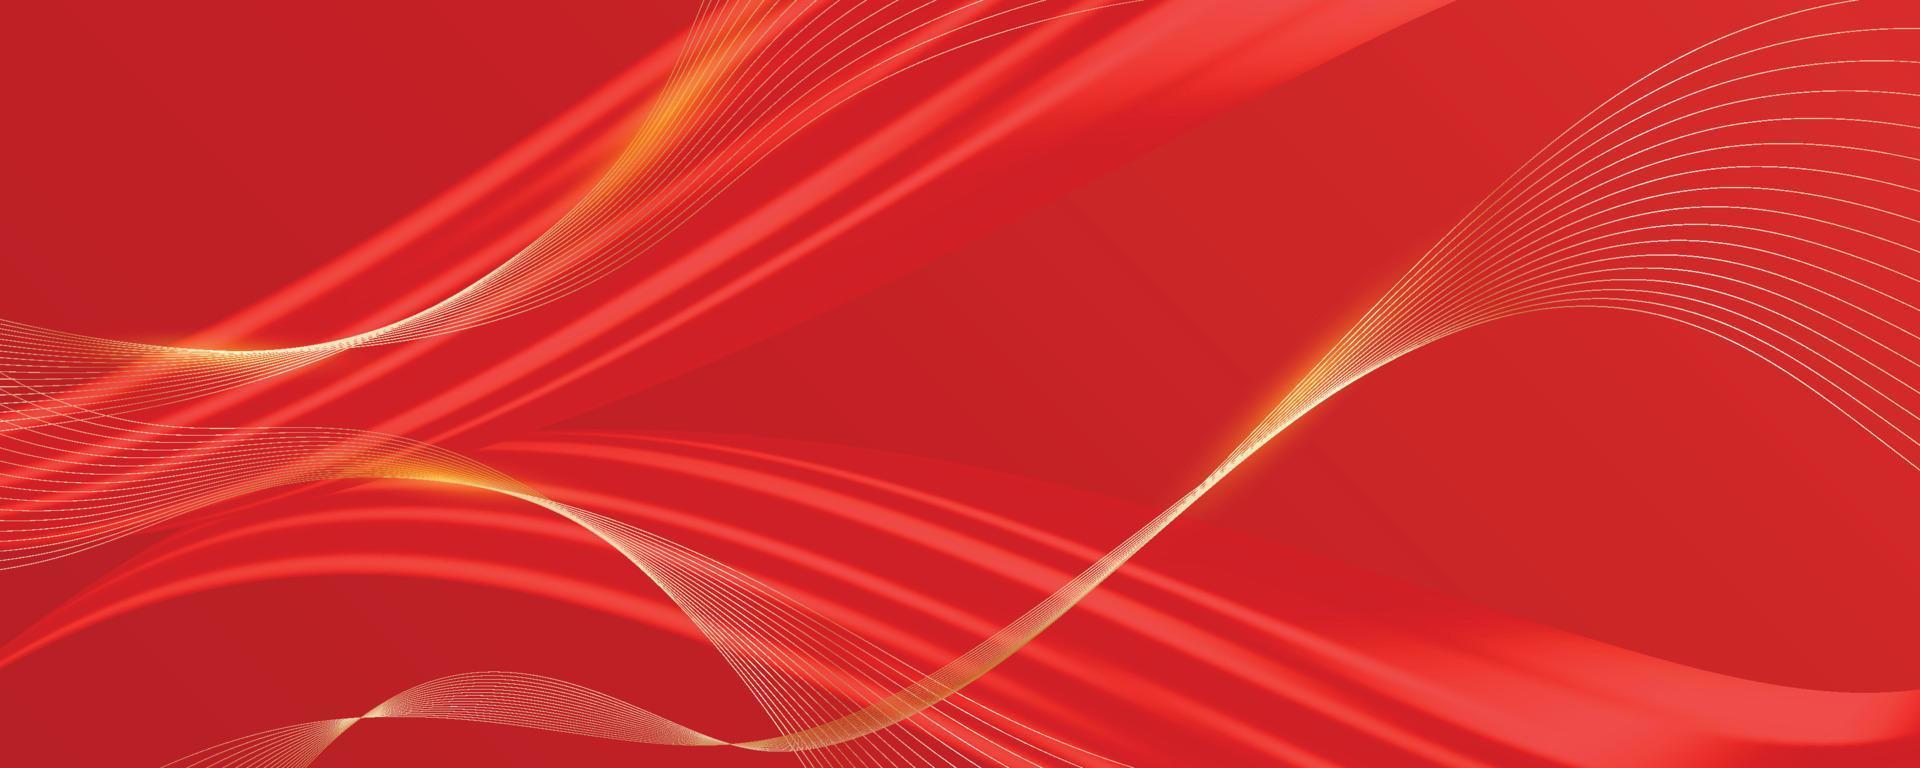 Abstract 3d red background with golden lines vector